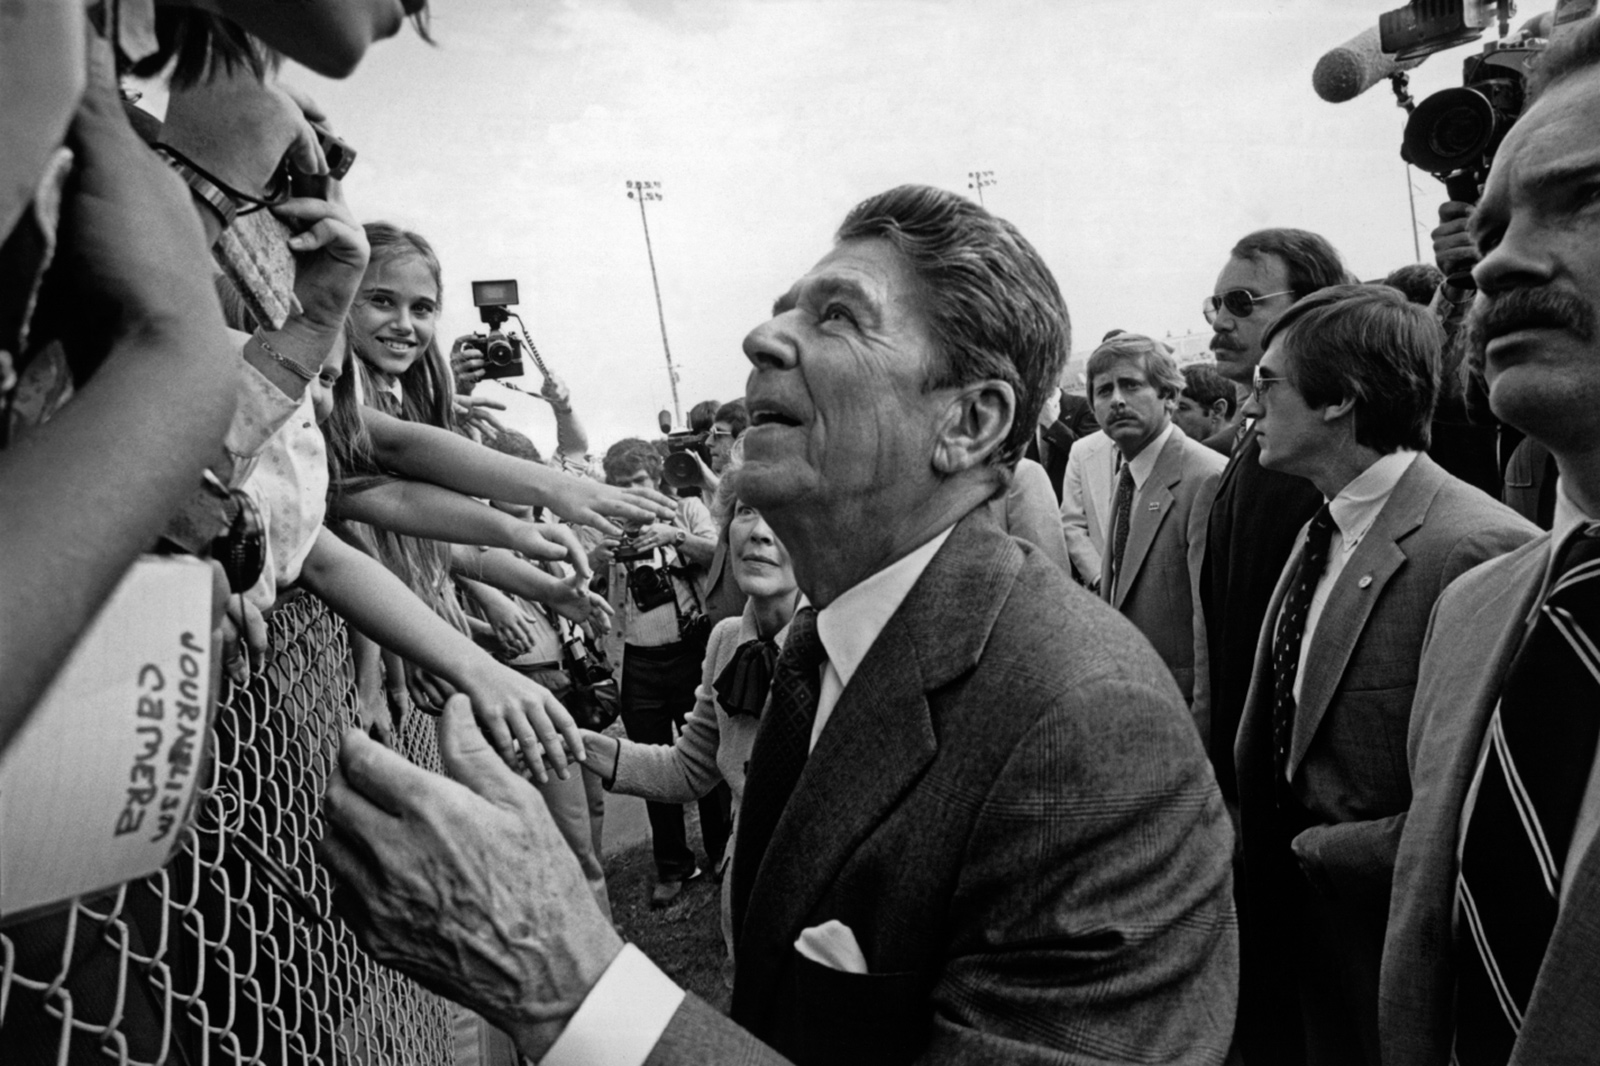 Ronald Reagan being welcomed by Puerto Ricans and Cubans in Tampa, Florida, during his 1980 presidential campaign